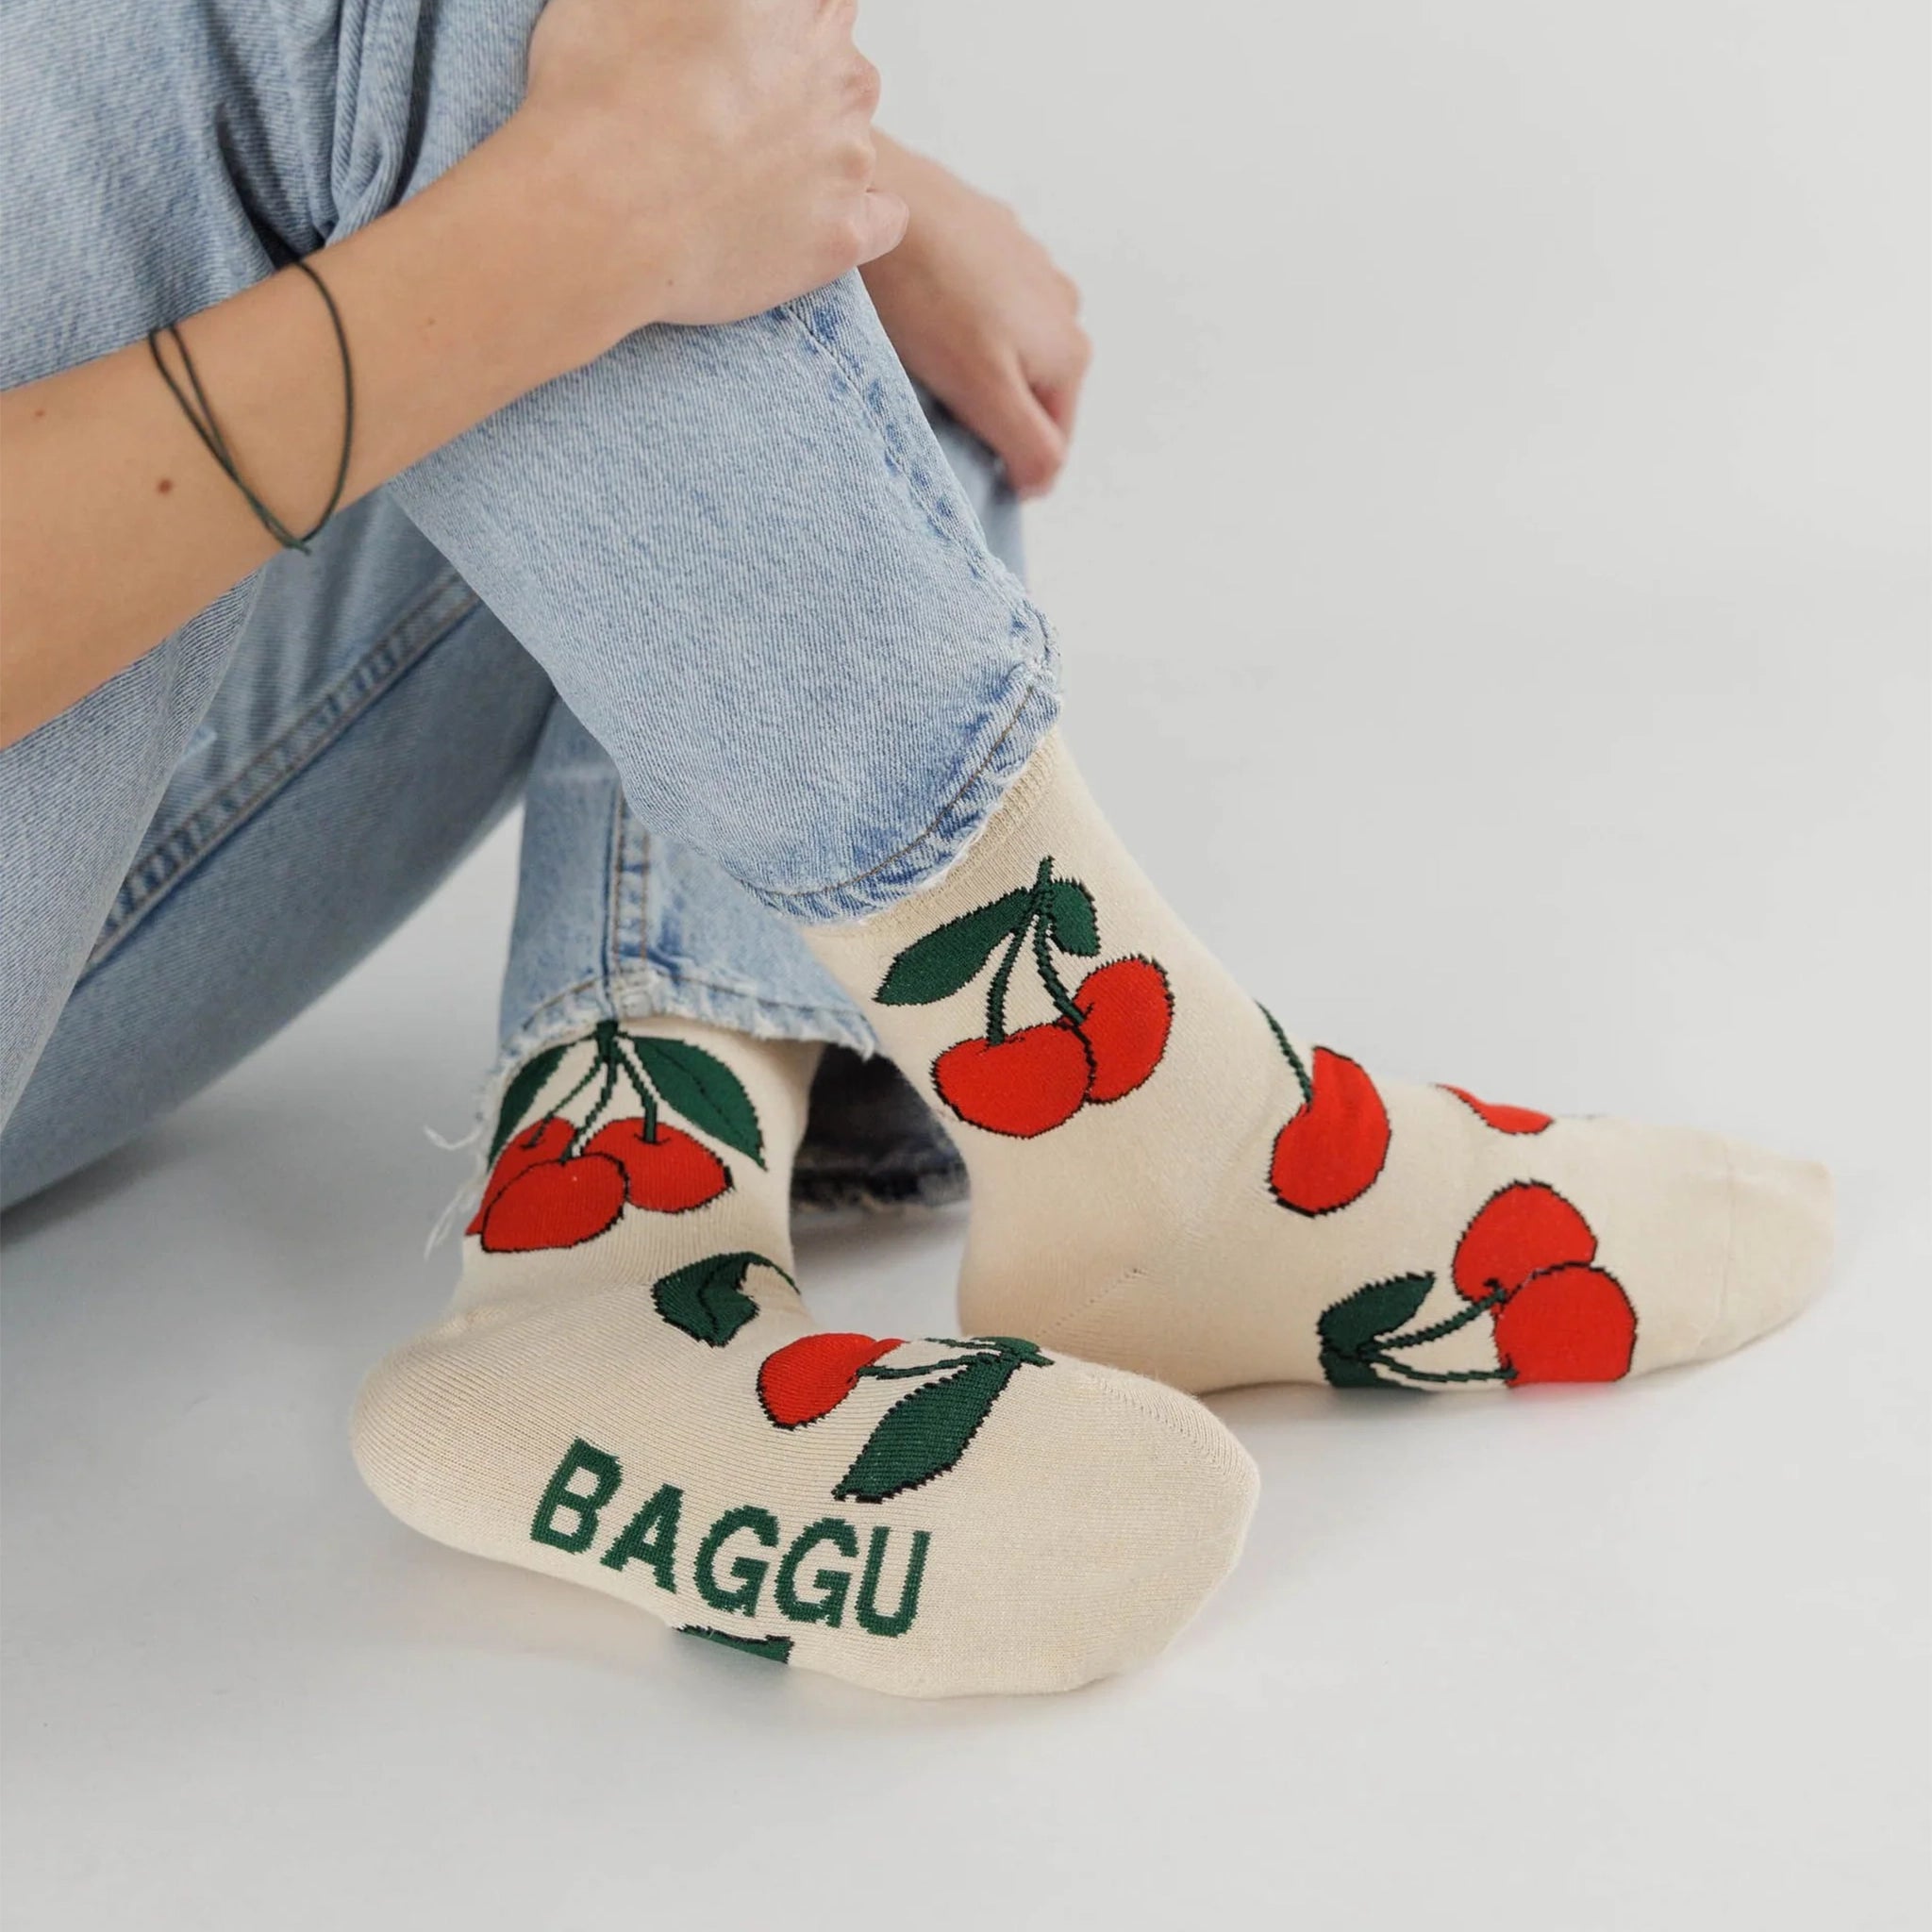 On a white background is a model wearing cream colored socks with a bright red cherries design on it along with &quot;Baggu&quot; on the bottom of the foot. 